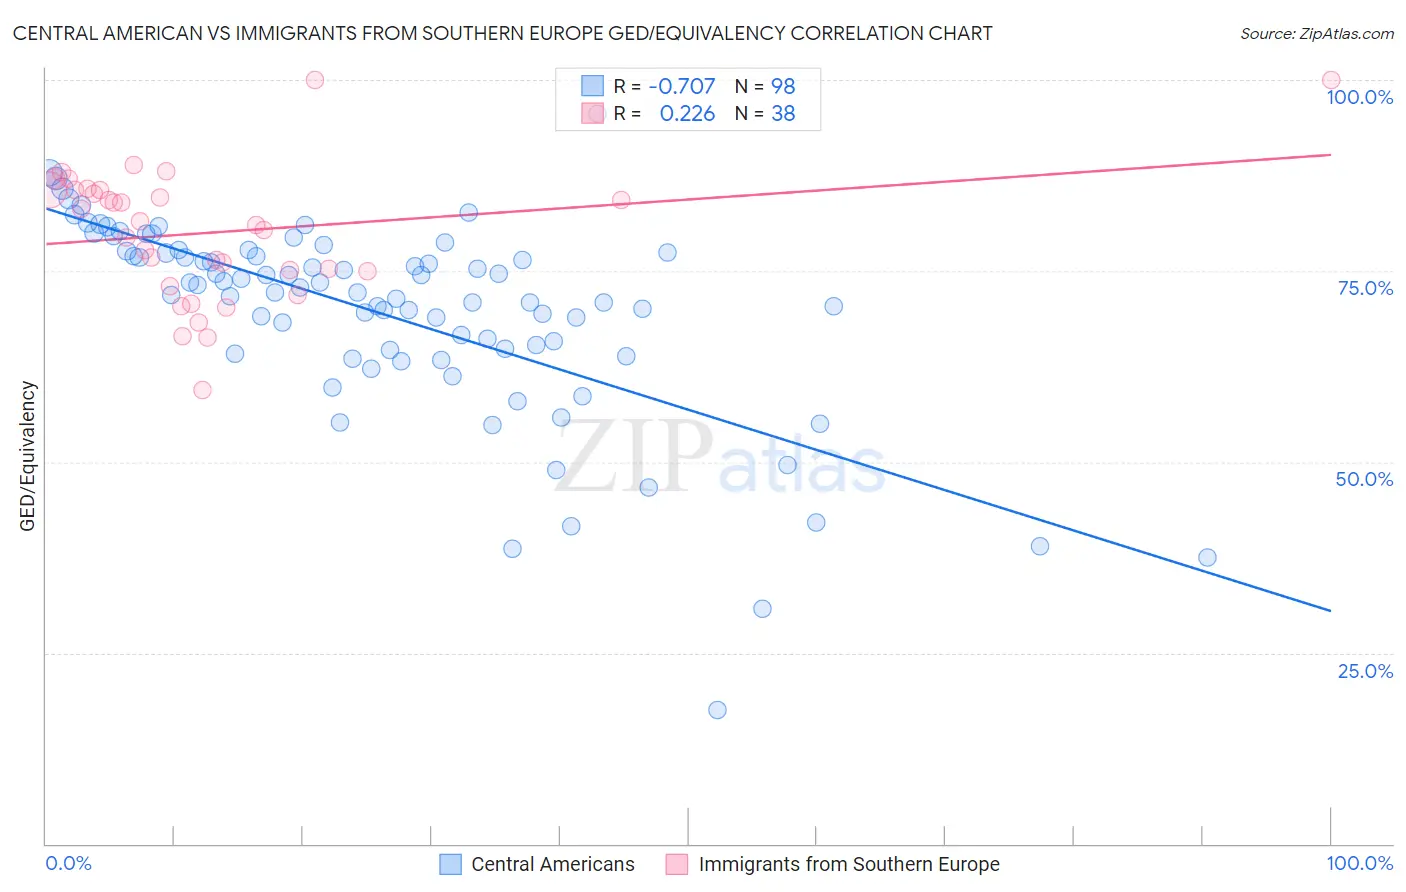 Central American vs Immigrants from Southern Europe GED/Equivalency